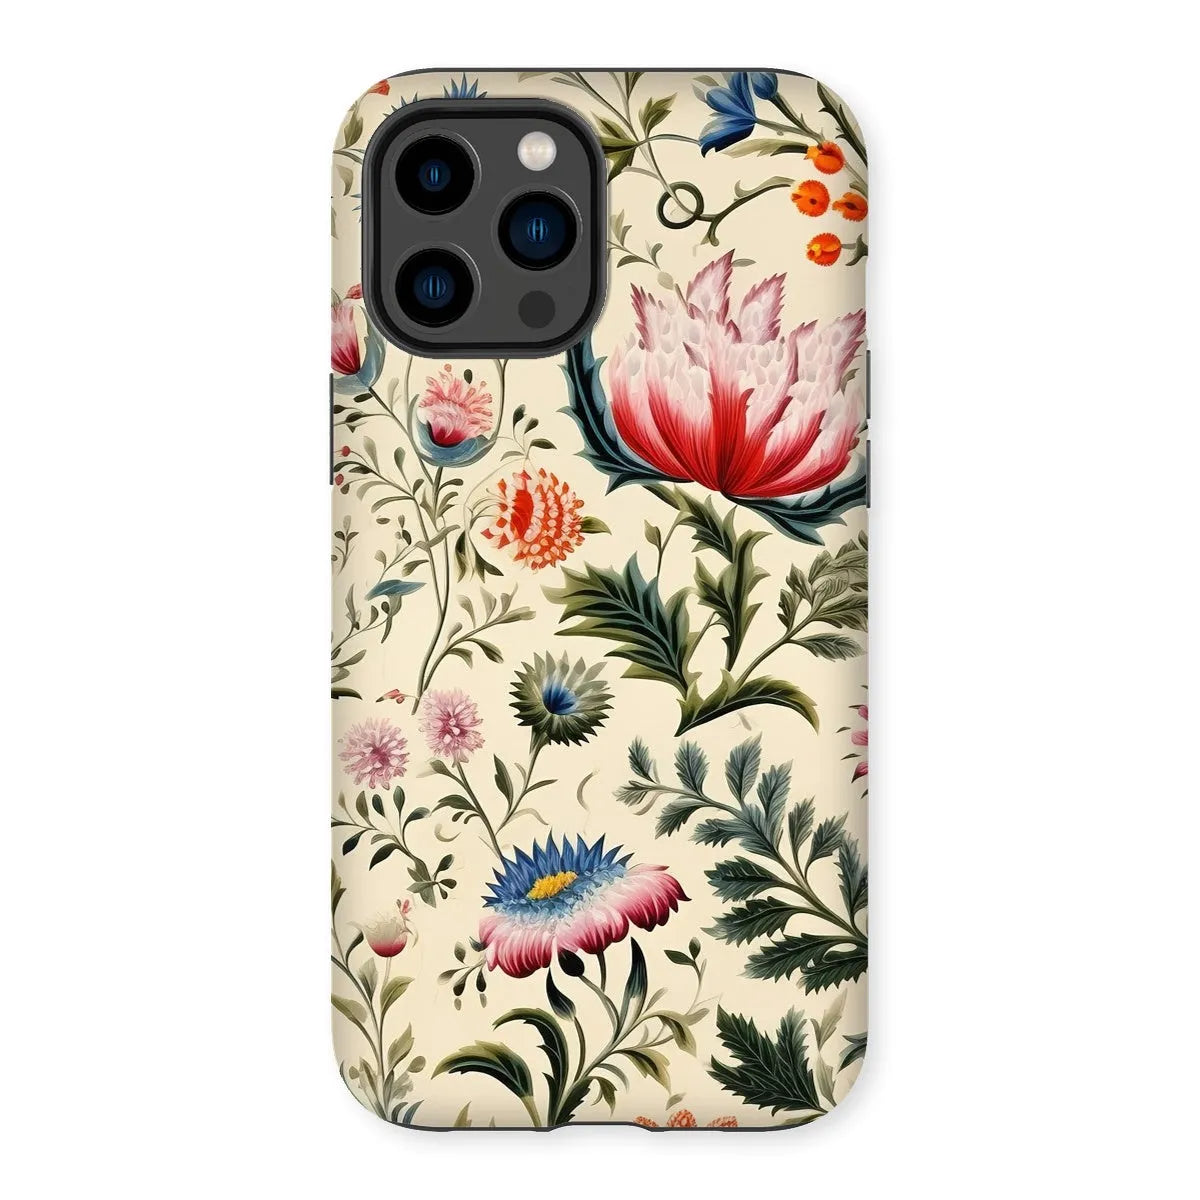 Wildflower Hoopla - Floral Garden Aesthetic Phone Case - Iphone 14 Pro Max / Matte - Mobile Phone Cases - Aesthetic Art